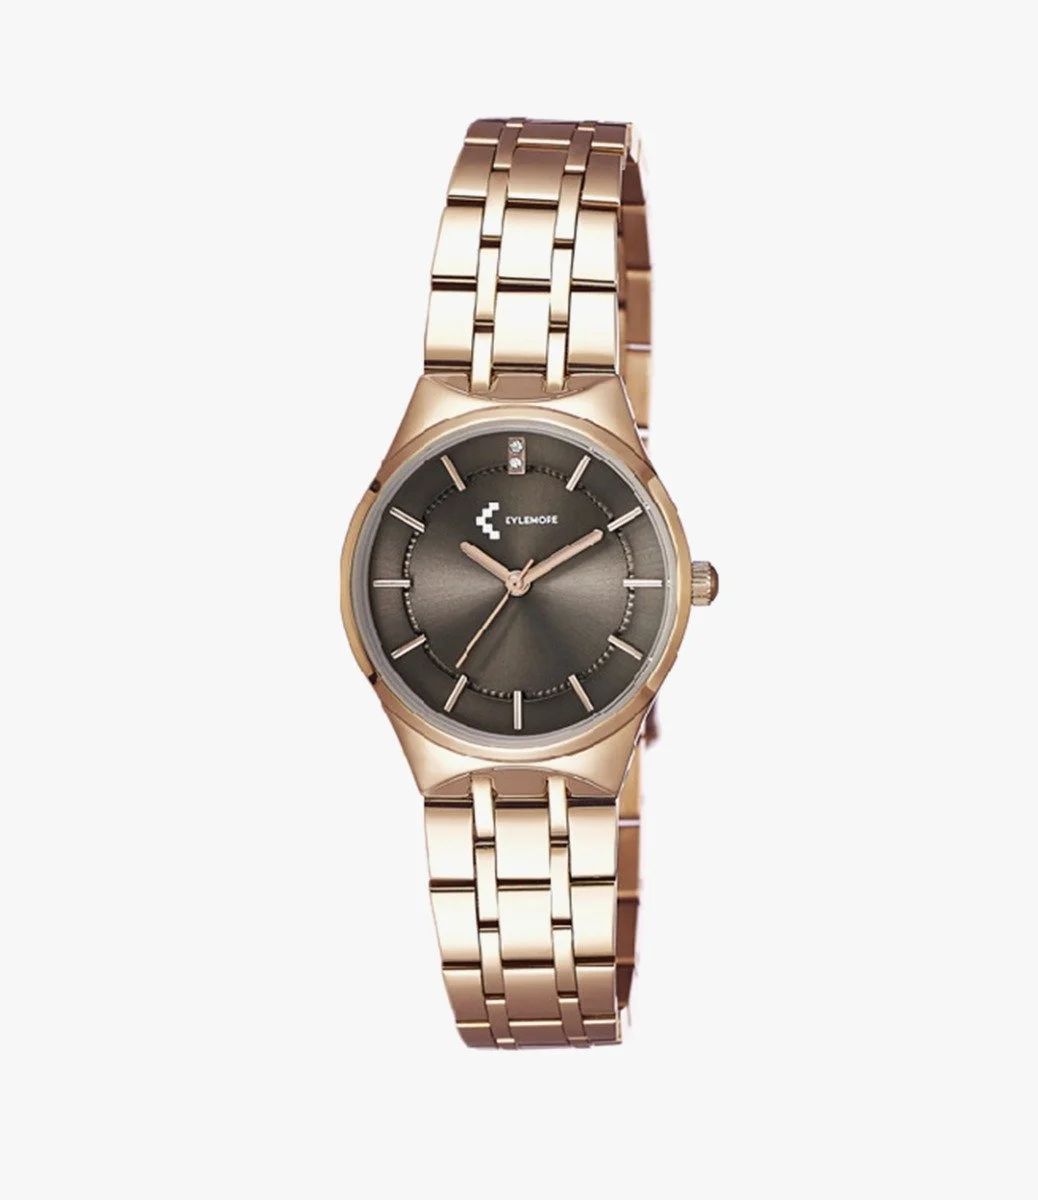 The Stainless Steel Gold Rose Kylemore Watch